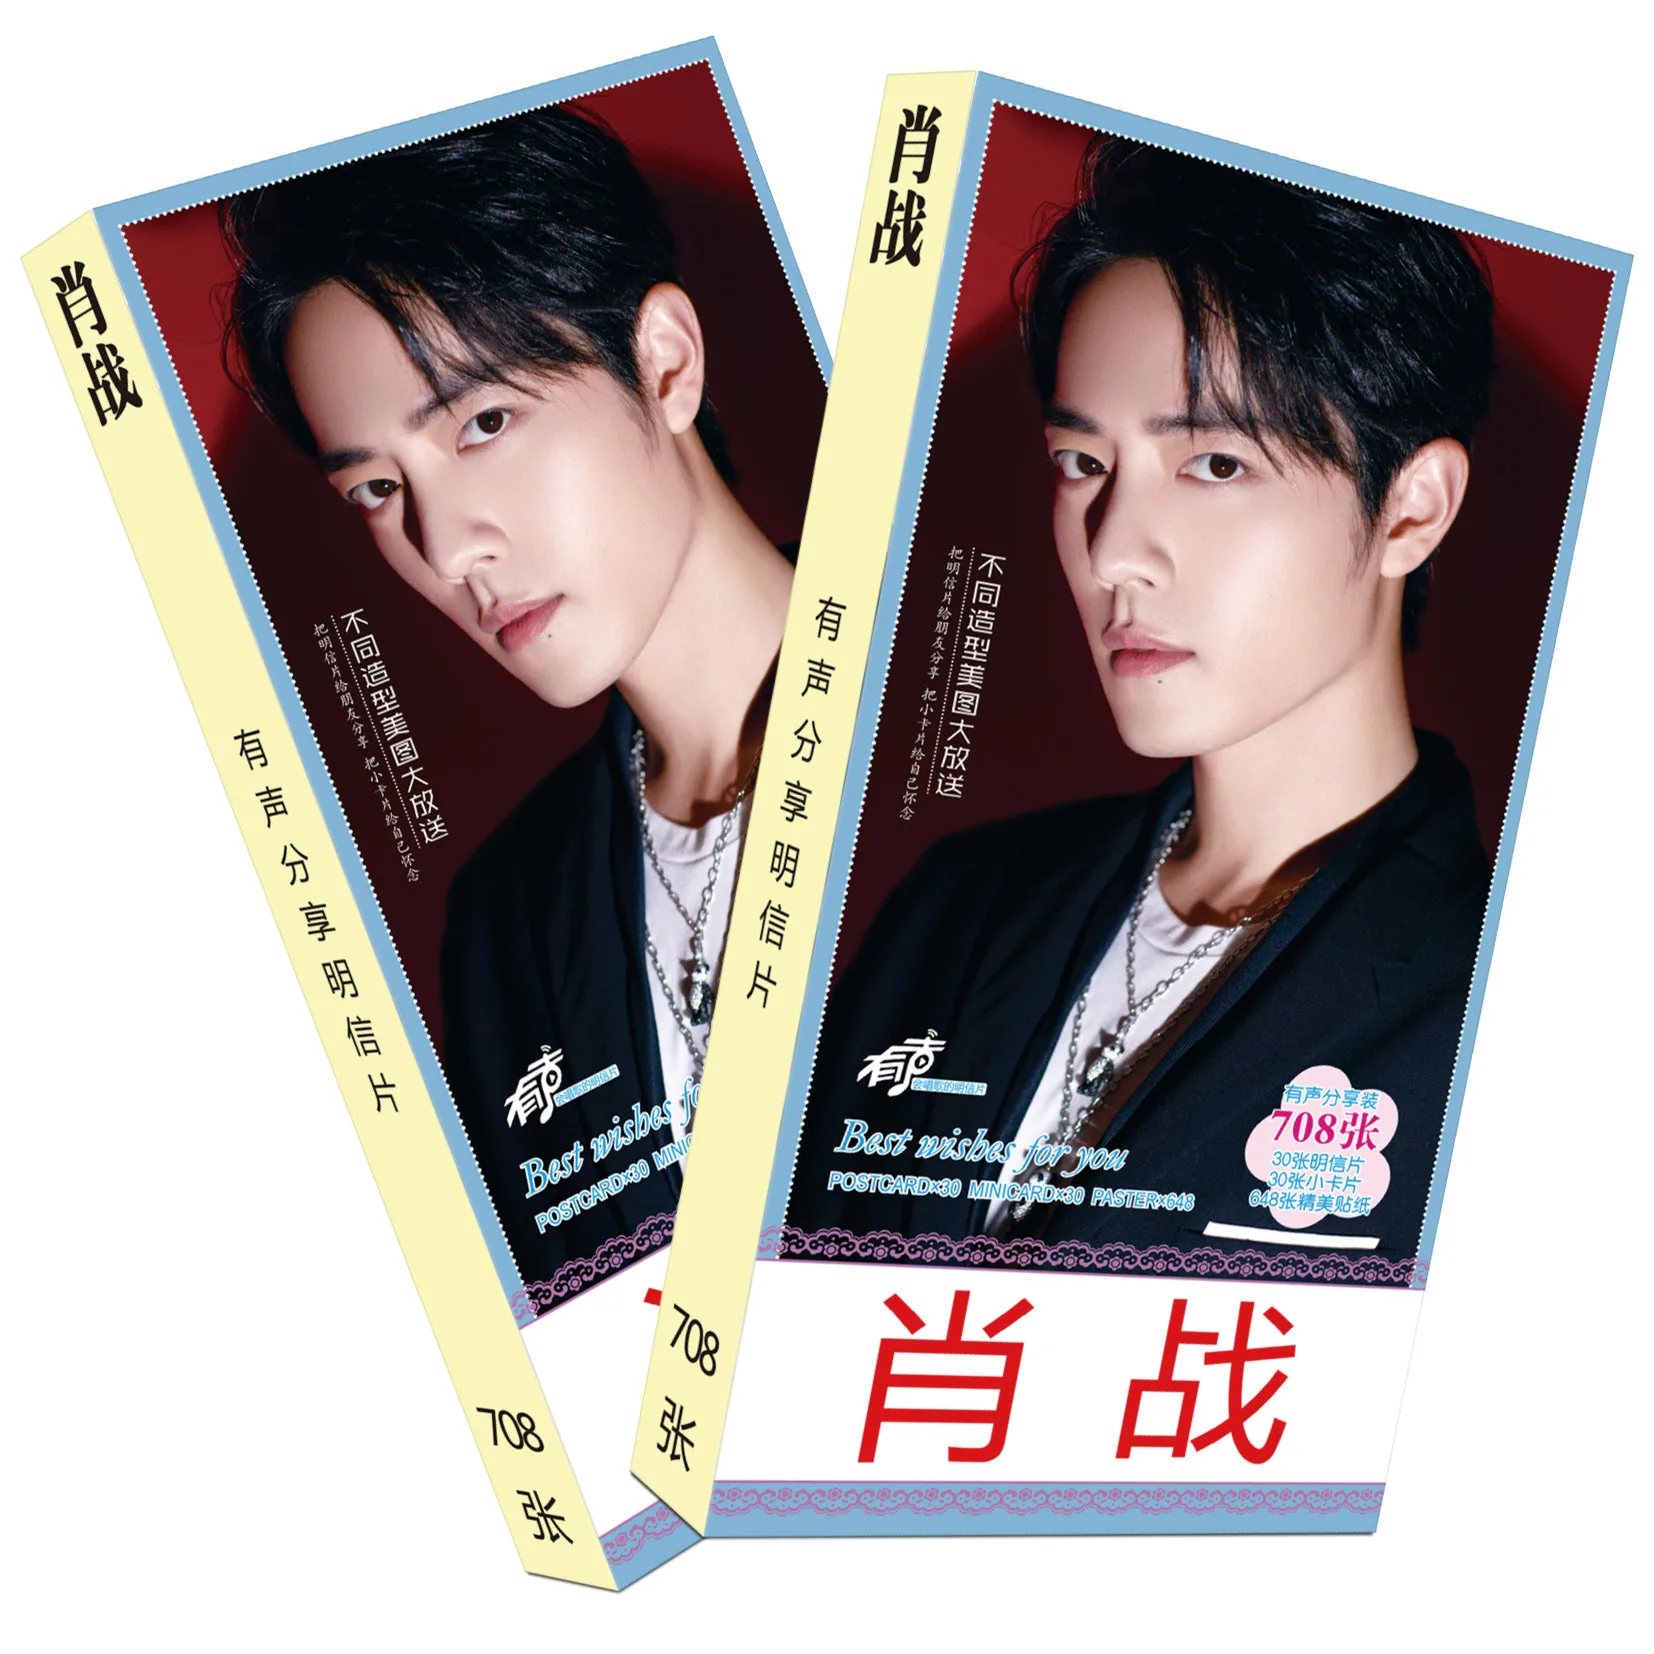 Xiao Zhan Photo Postcard Stickers Set China TV Drama Male Artist Singer Picture Photo Card Christmas Gift 2 Boxes